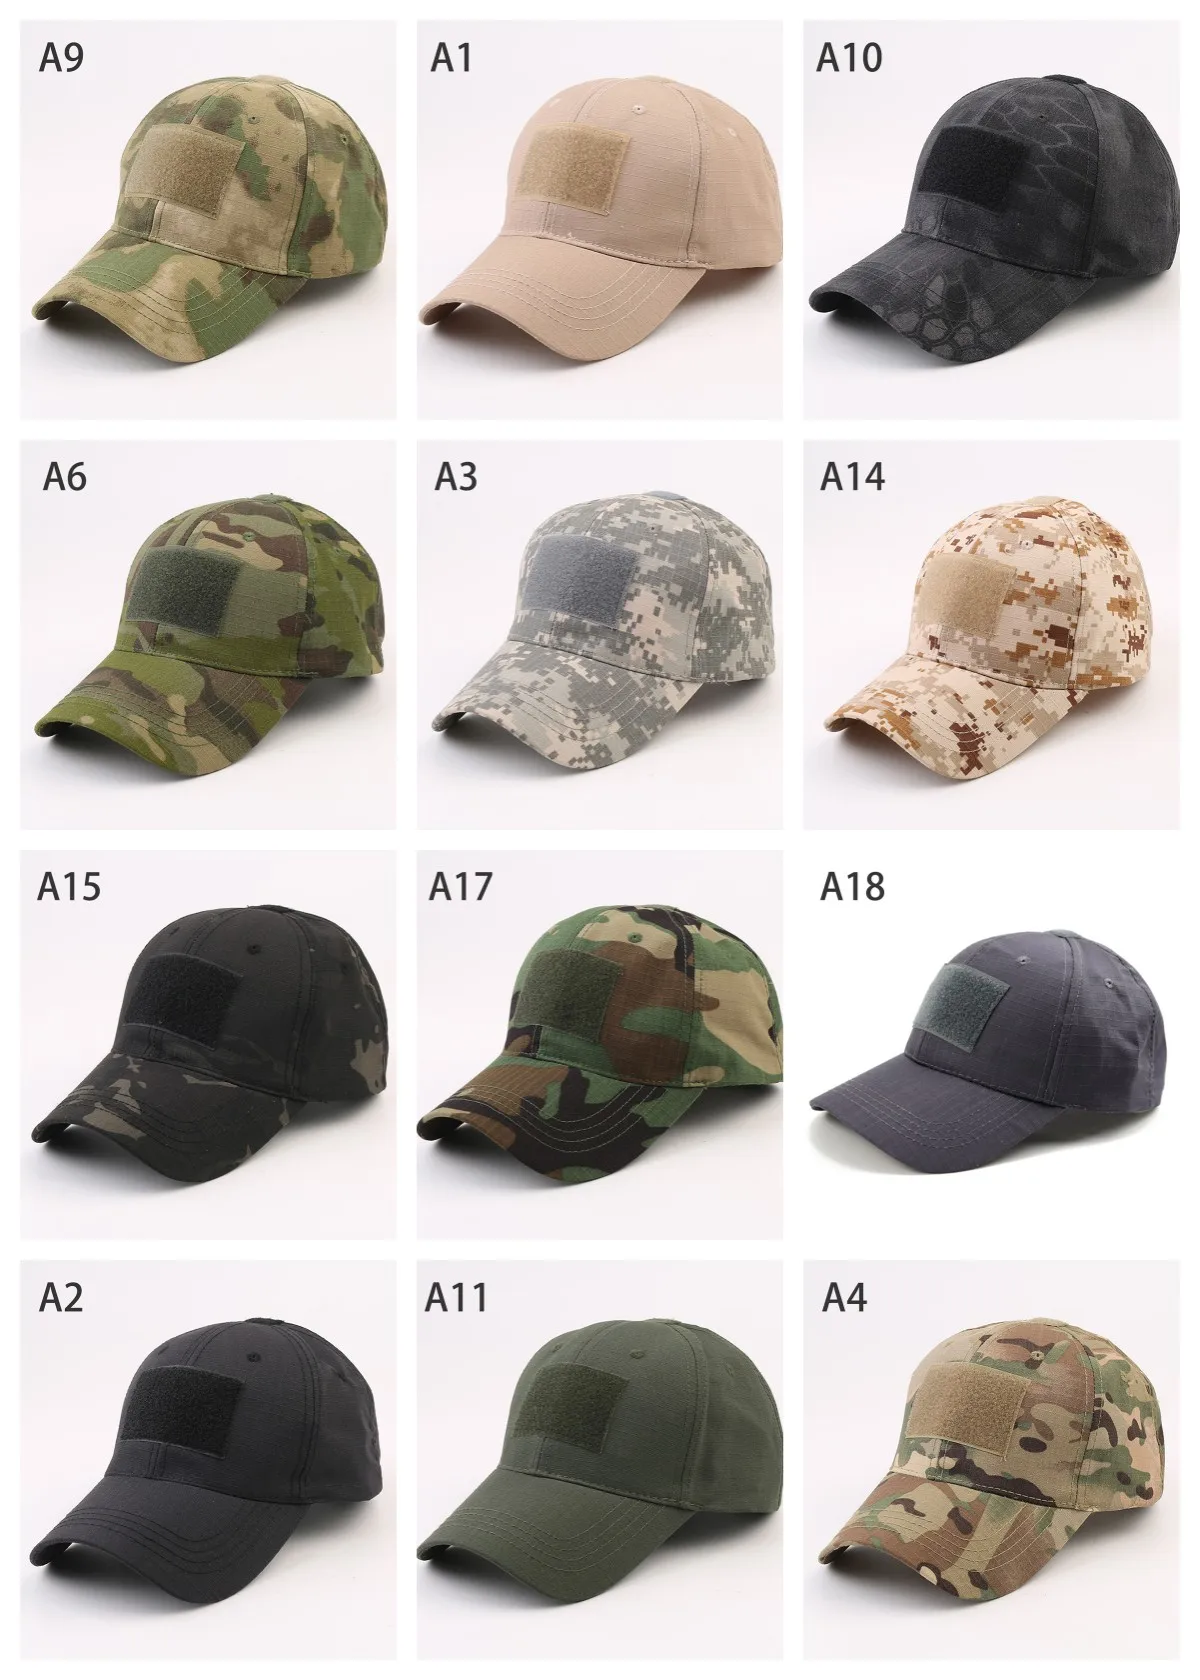 

Outdoor Multicam Camouflage Adjustable Cap Mesh Tactical Military Army Airsoft Fishing Hunting Hiking Basketball Snapback Hat